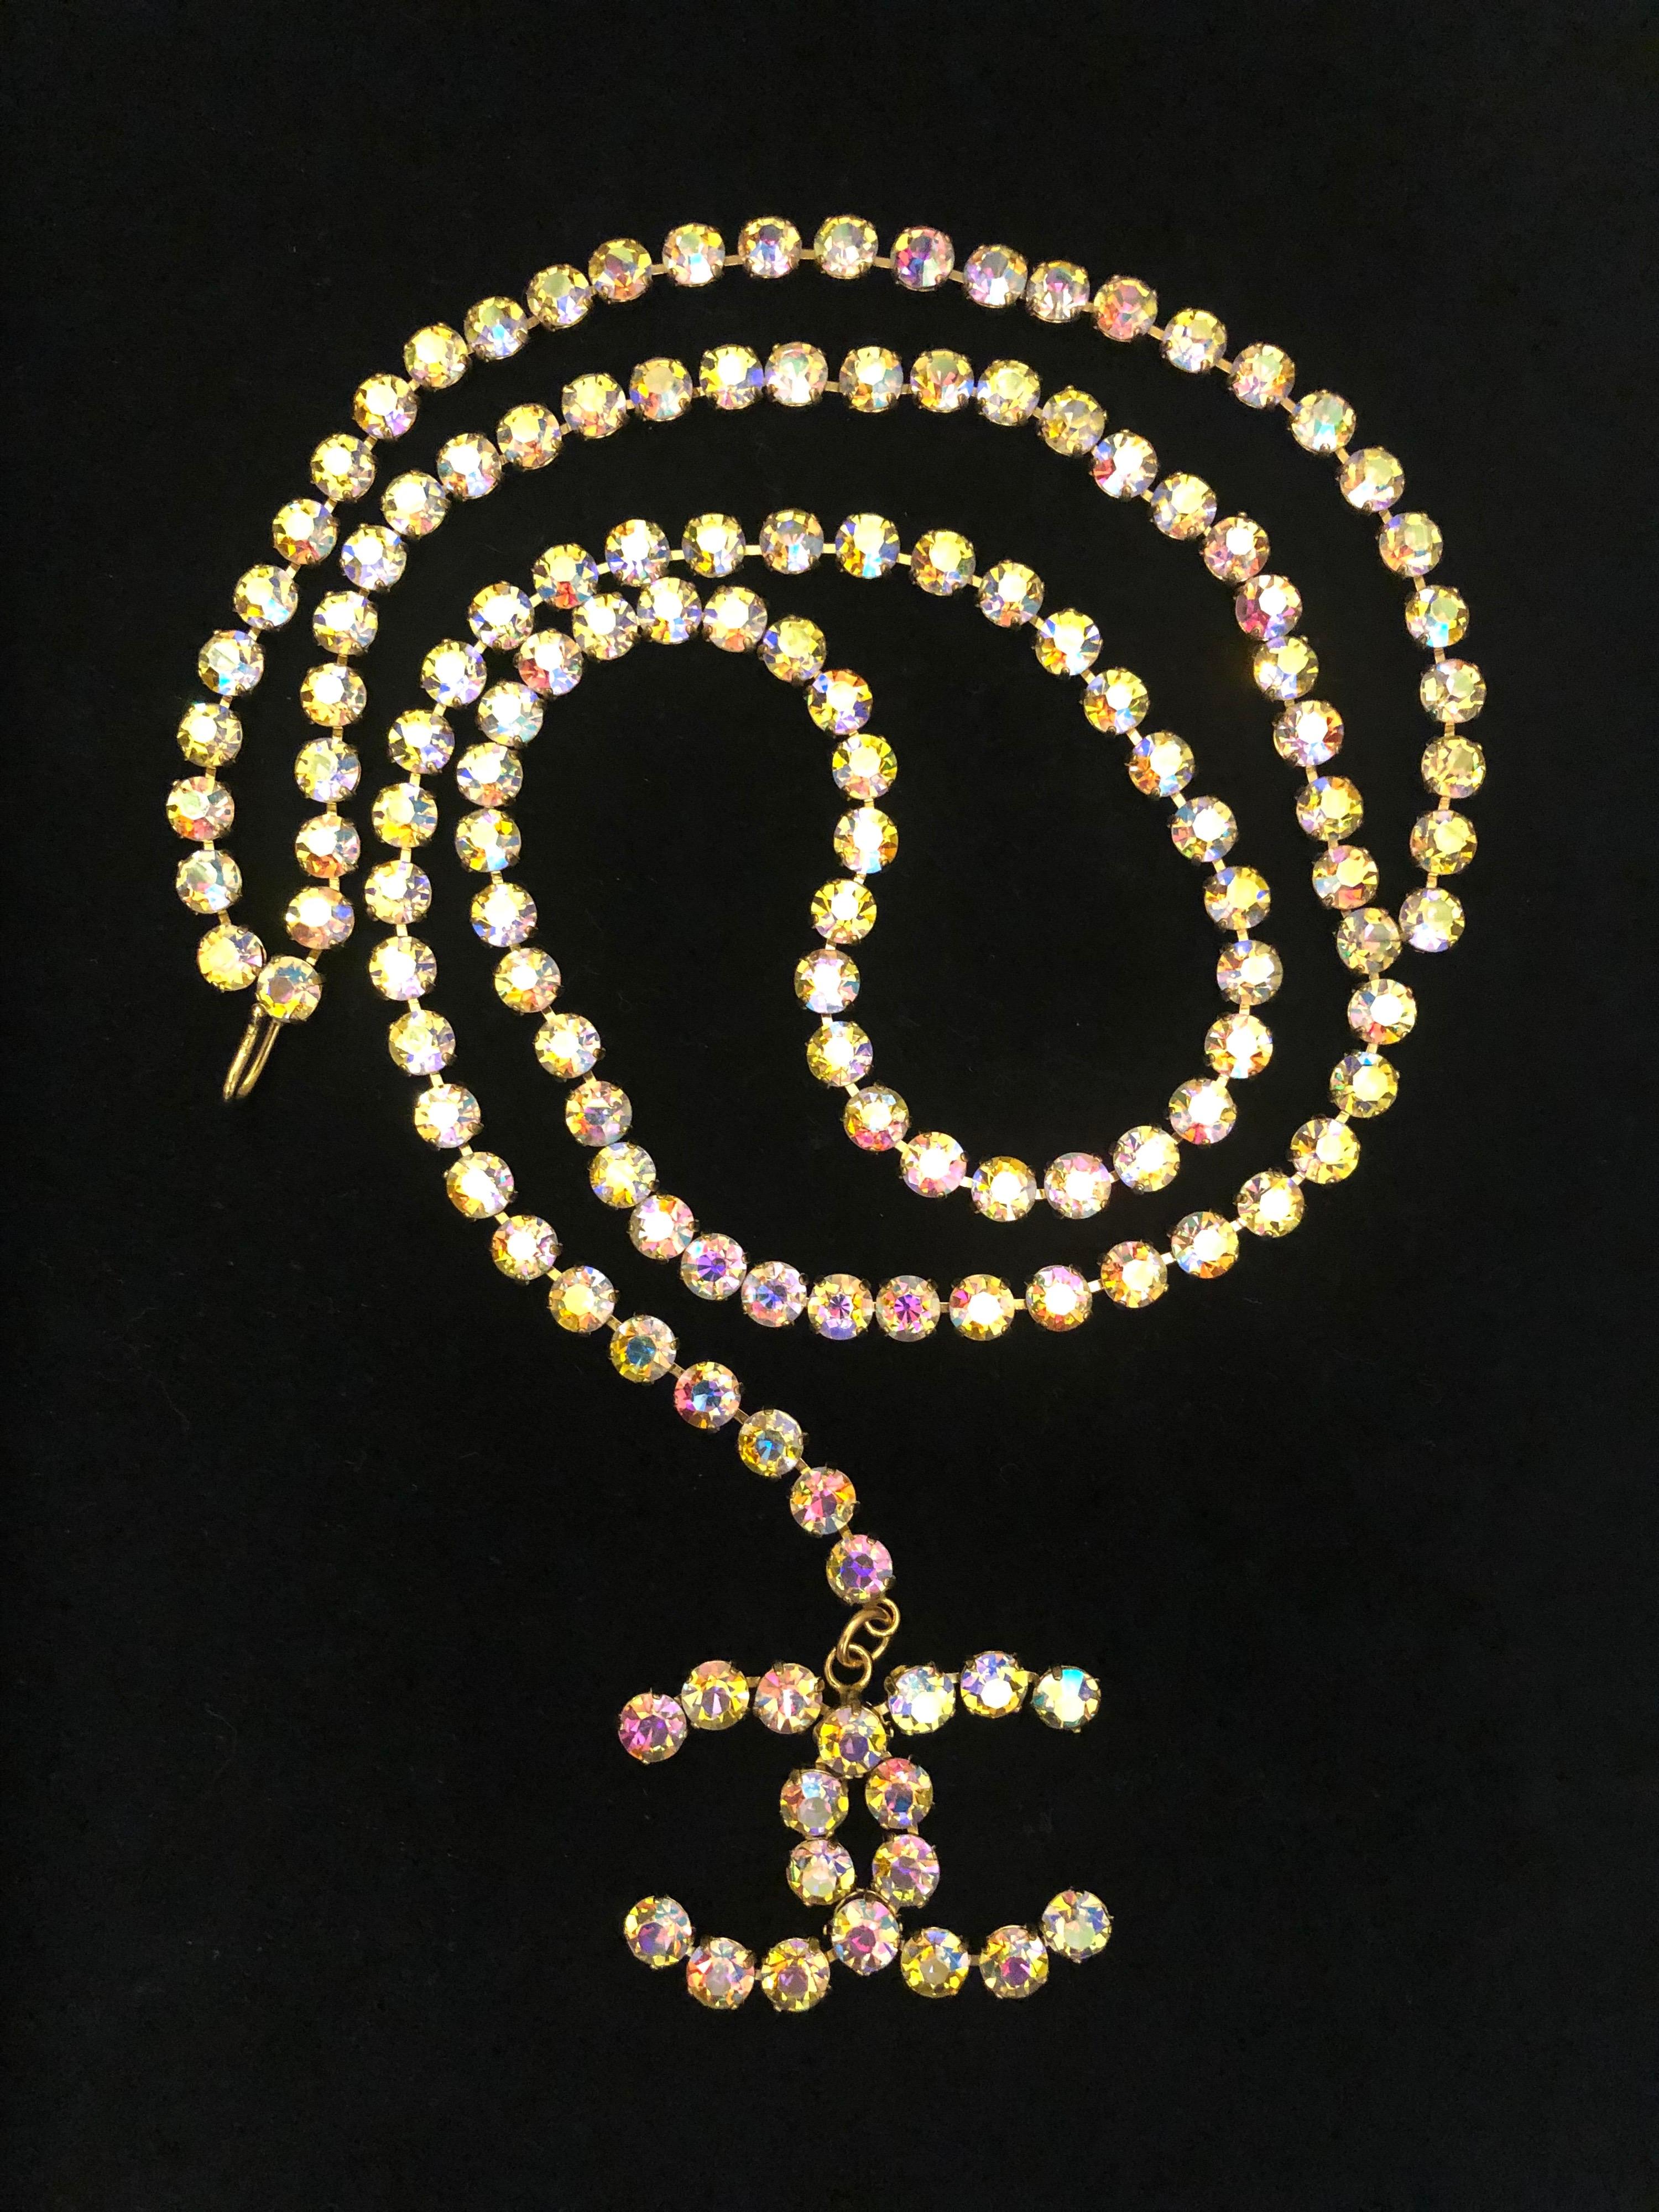 1995 Runway Chanel chain belt in multicolored rhinestones featuring a rhinestoned CC Charm. Seen on supermodels Naomi Campbell and Linda Evangelista on the runway of Chanel Spring/Summer 1995 collection.
Adjustable hook fastening. Stamped 95P made